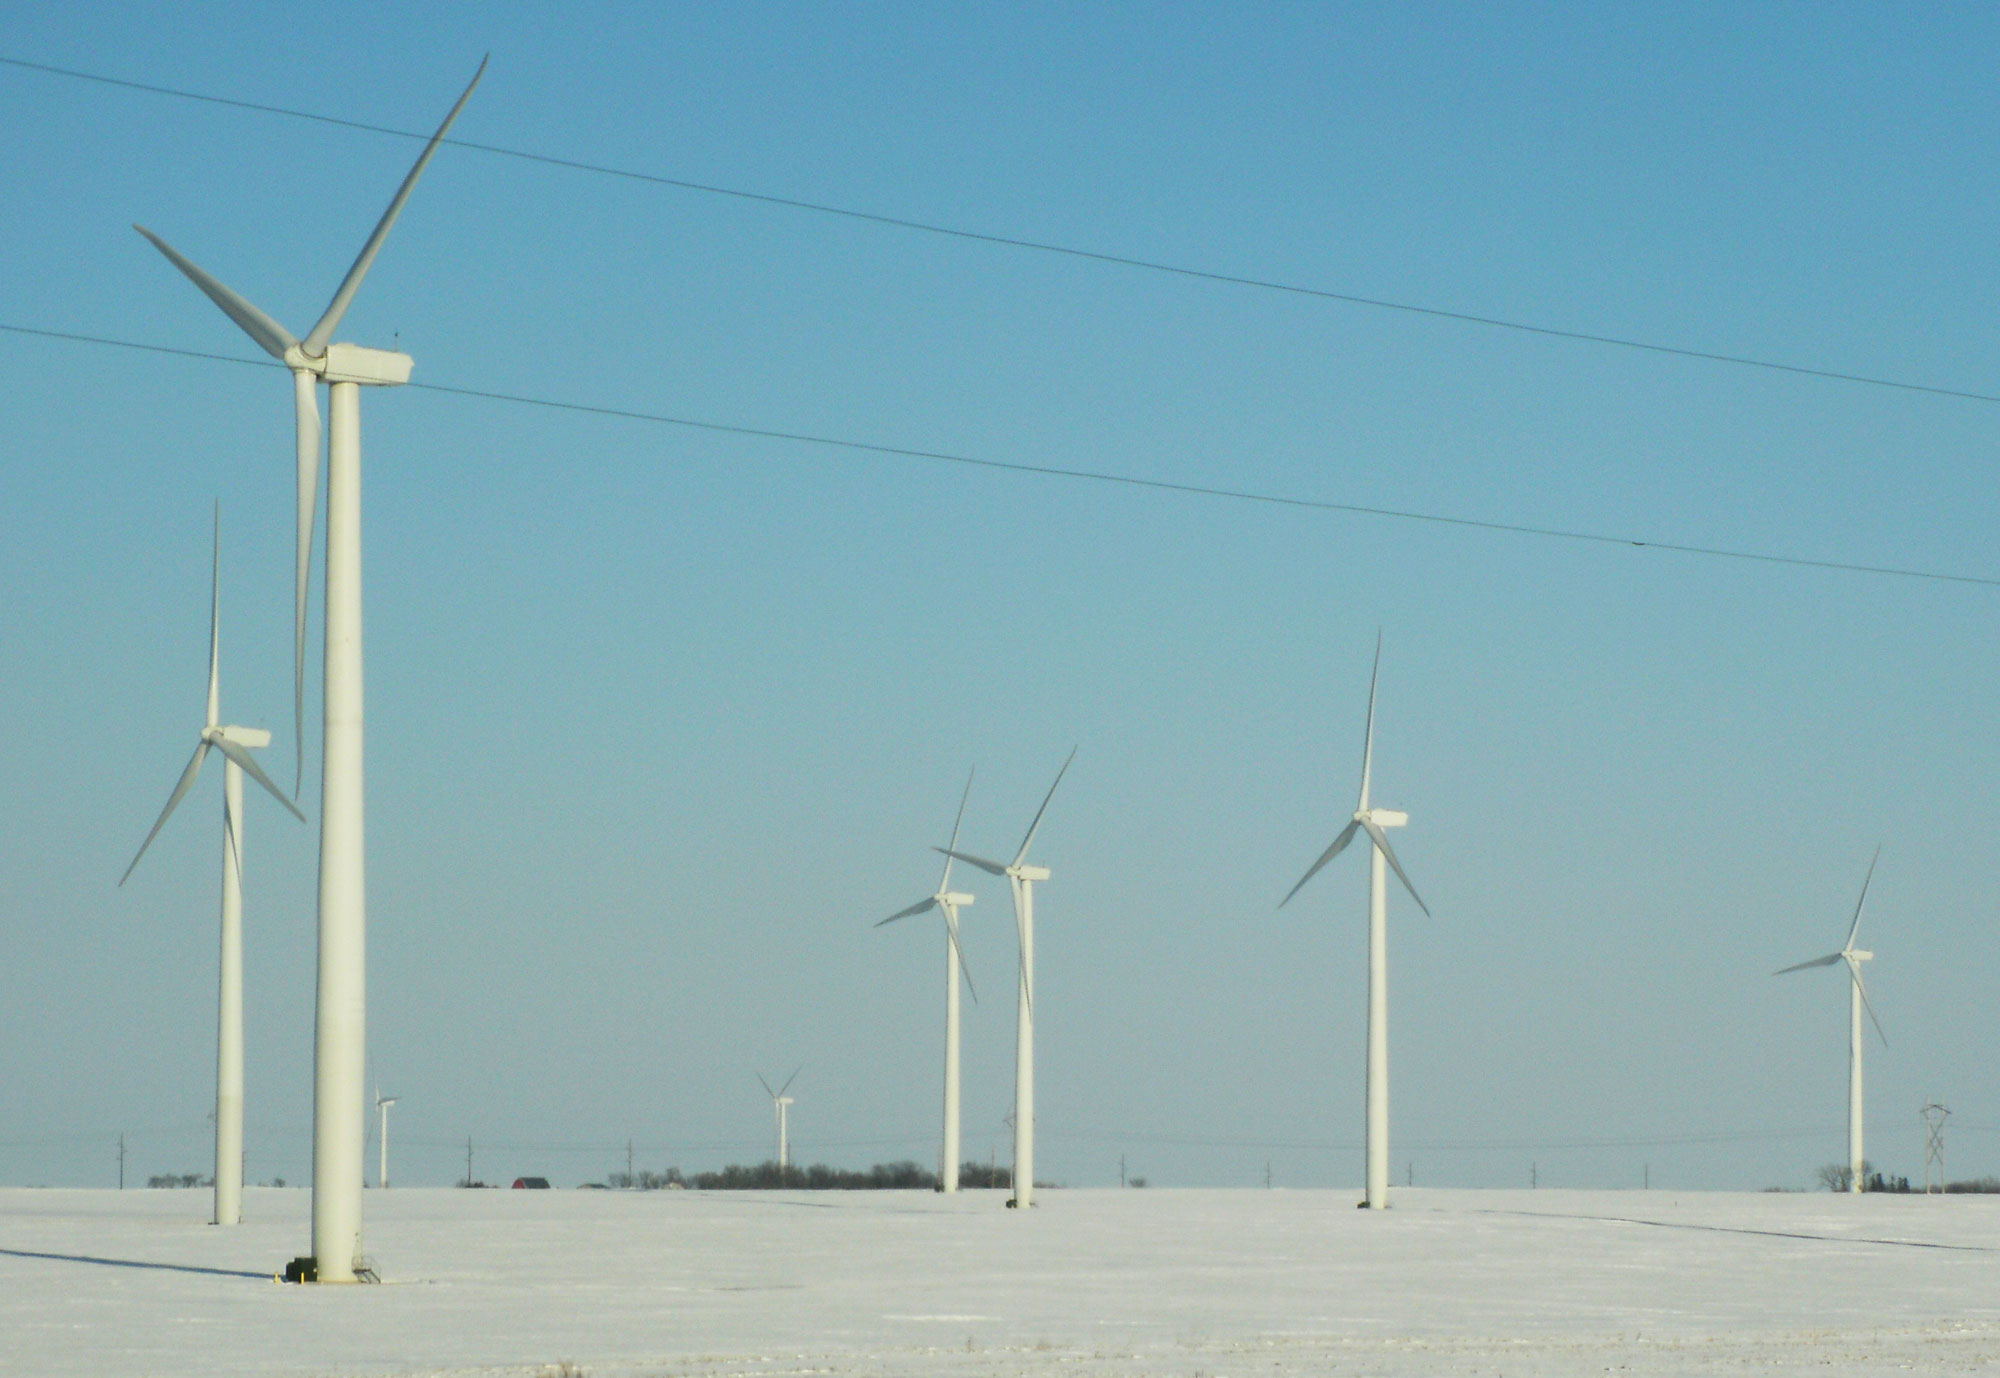 Photograph of wind turbines in a field in Minnesota. The photo shows white turbines scattered in a flat, snow-covered field. The turbines are shown from the side or obliquely. 